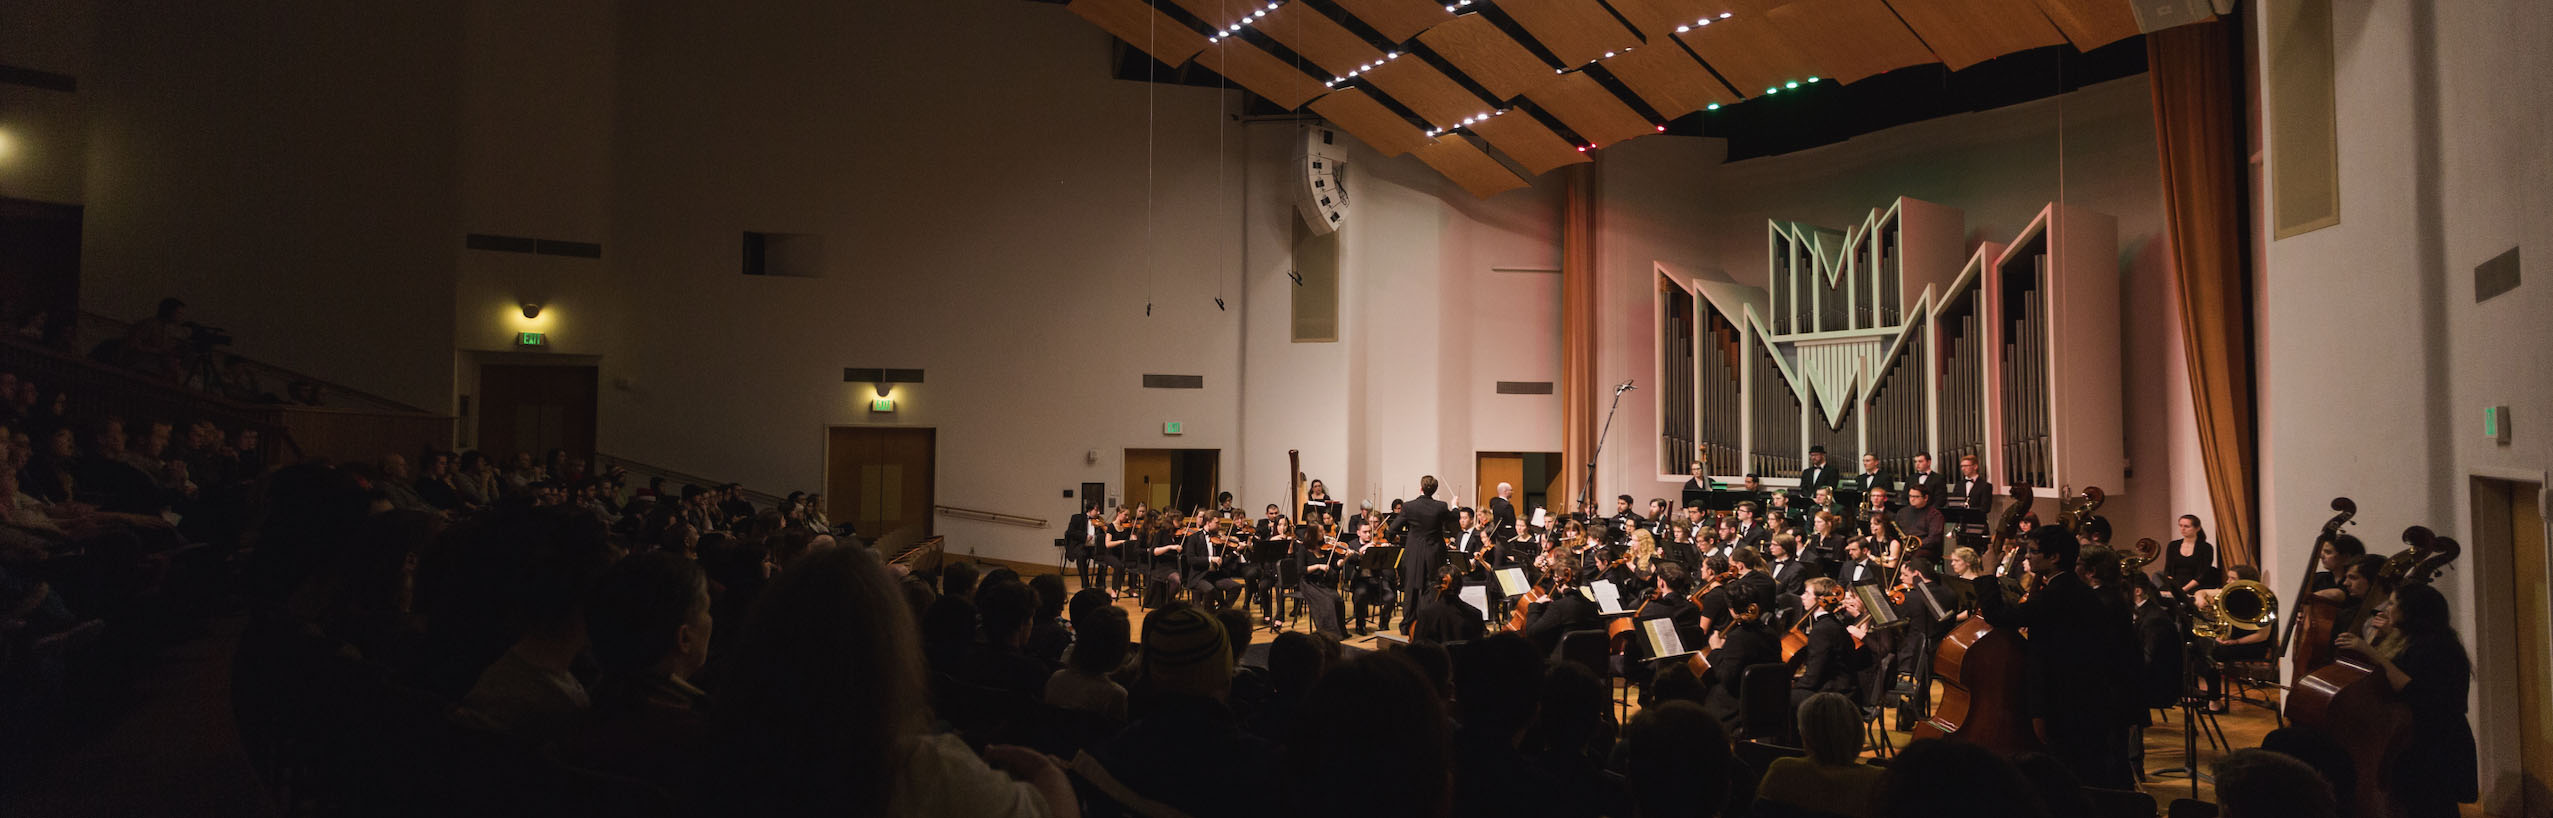 A view of the concert hall from the audience during a performance.